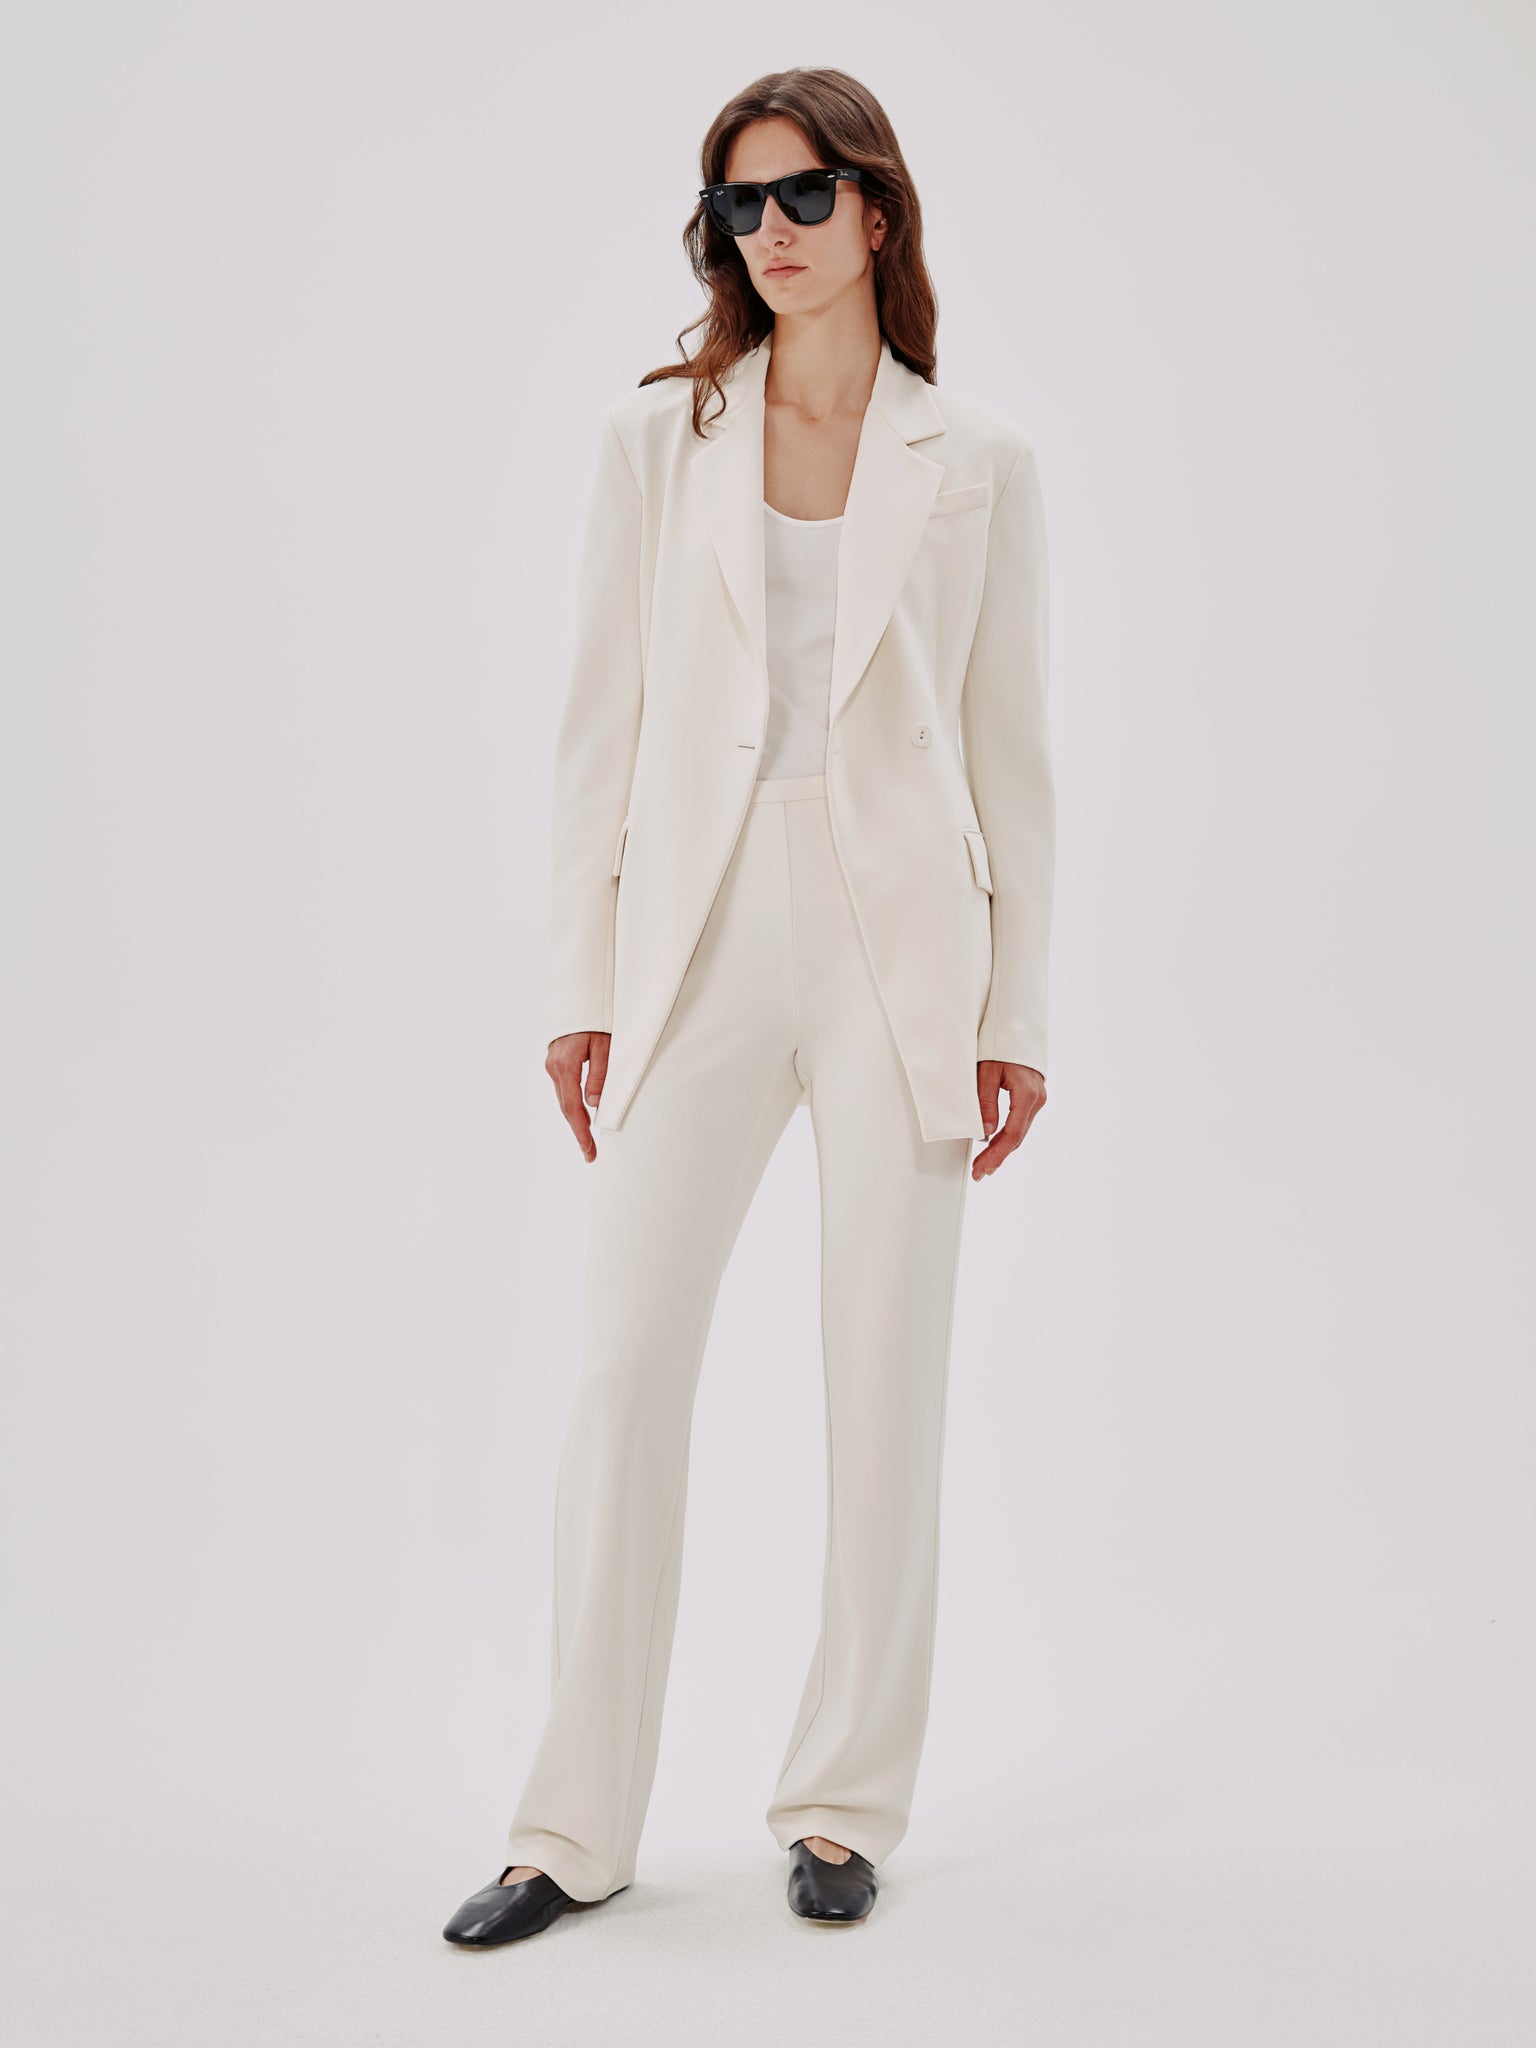 Another Tomorrow Everyday Suiting Pant In Cream